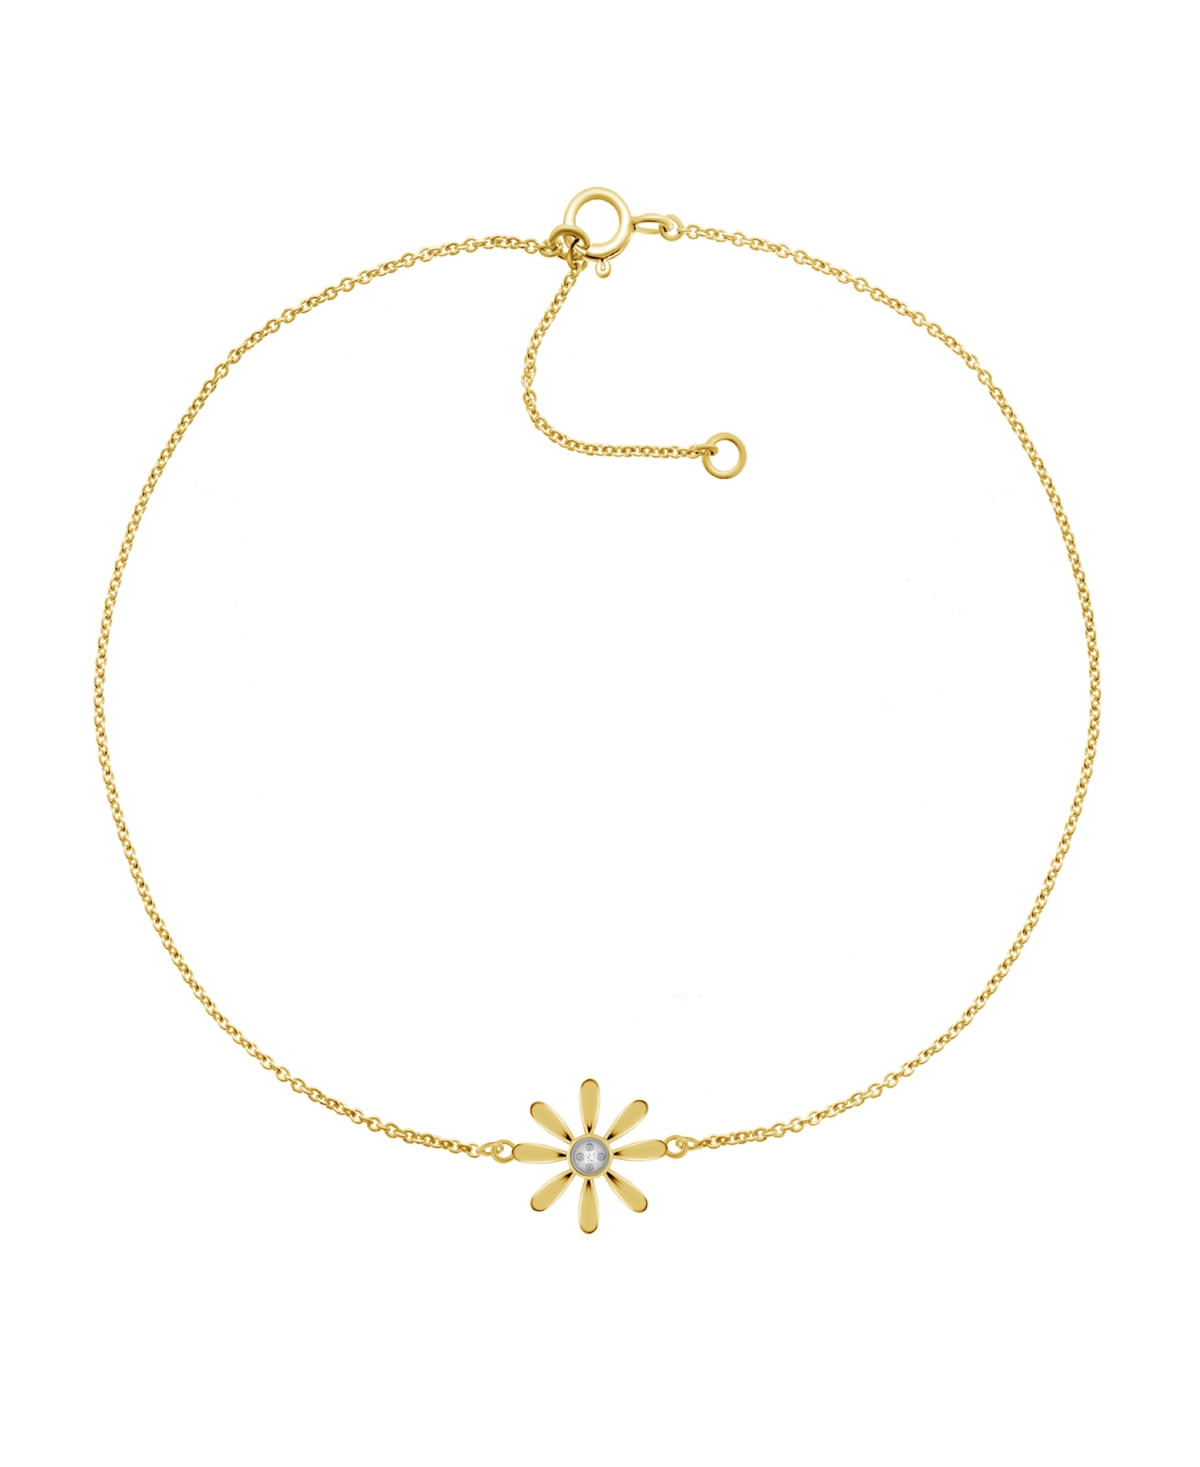 Diamond Accent Flower Anklet In 14K Gold-Plated Sterling Silver , 9" + 1" extender - K Gold-plated sterling silver